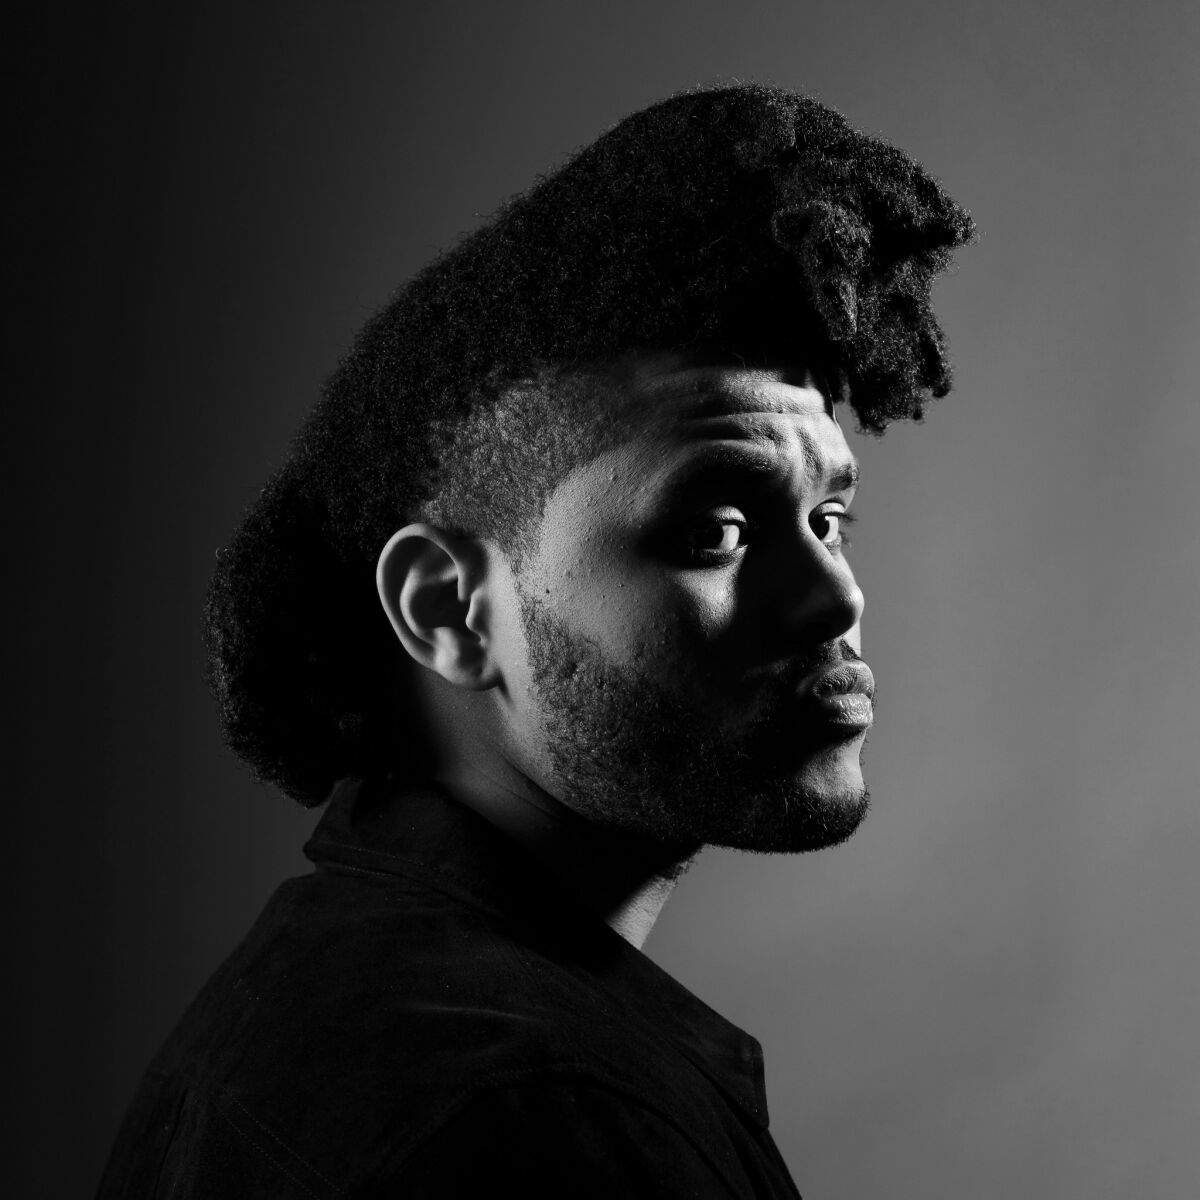 "You never know what the impact is going to be after the Oscars or the Grammys. That’s a whole new America," Abel Tesfaye, better known as the Weeknd, says. "There are people who don’t even know who sings 'Can’t Feel My Face.'"